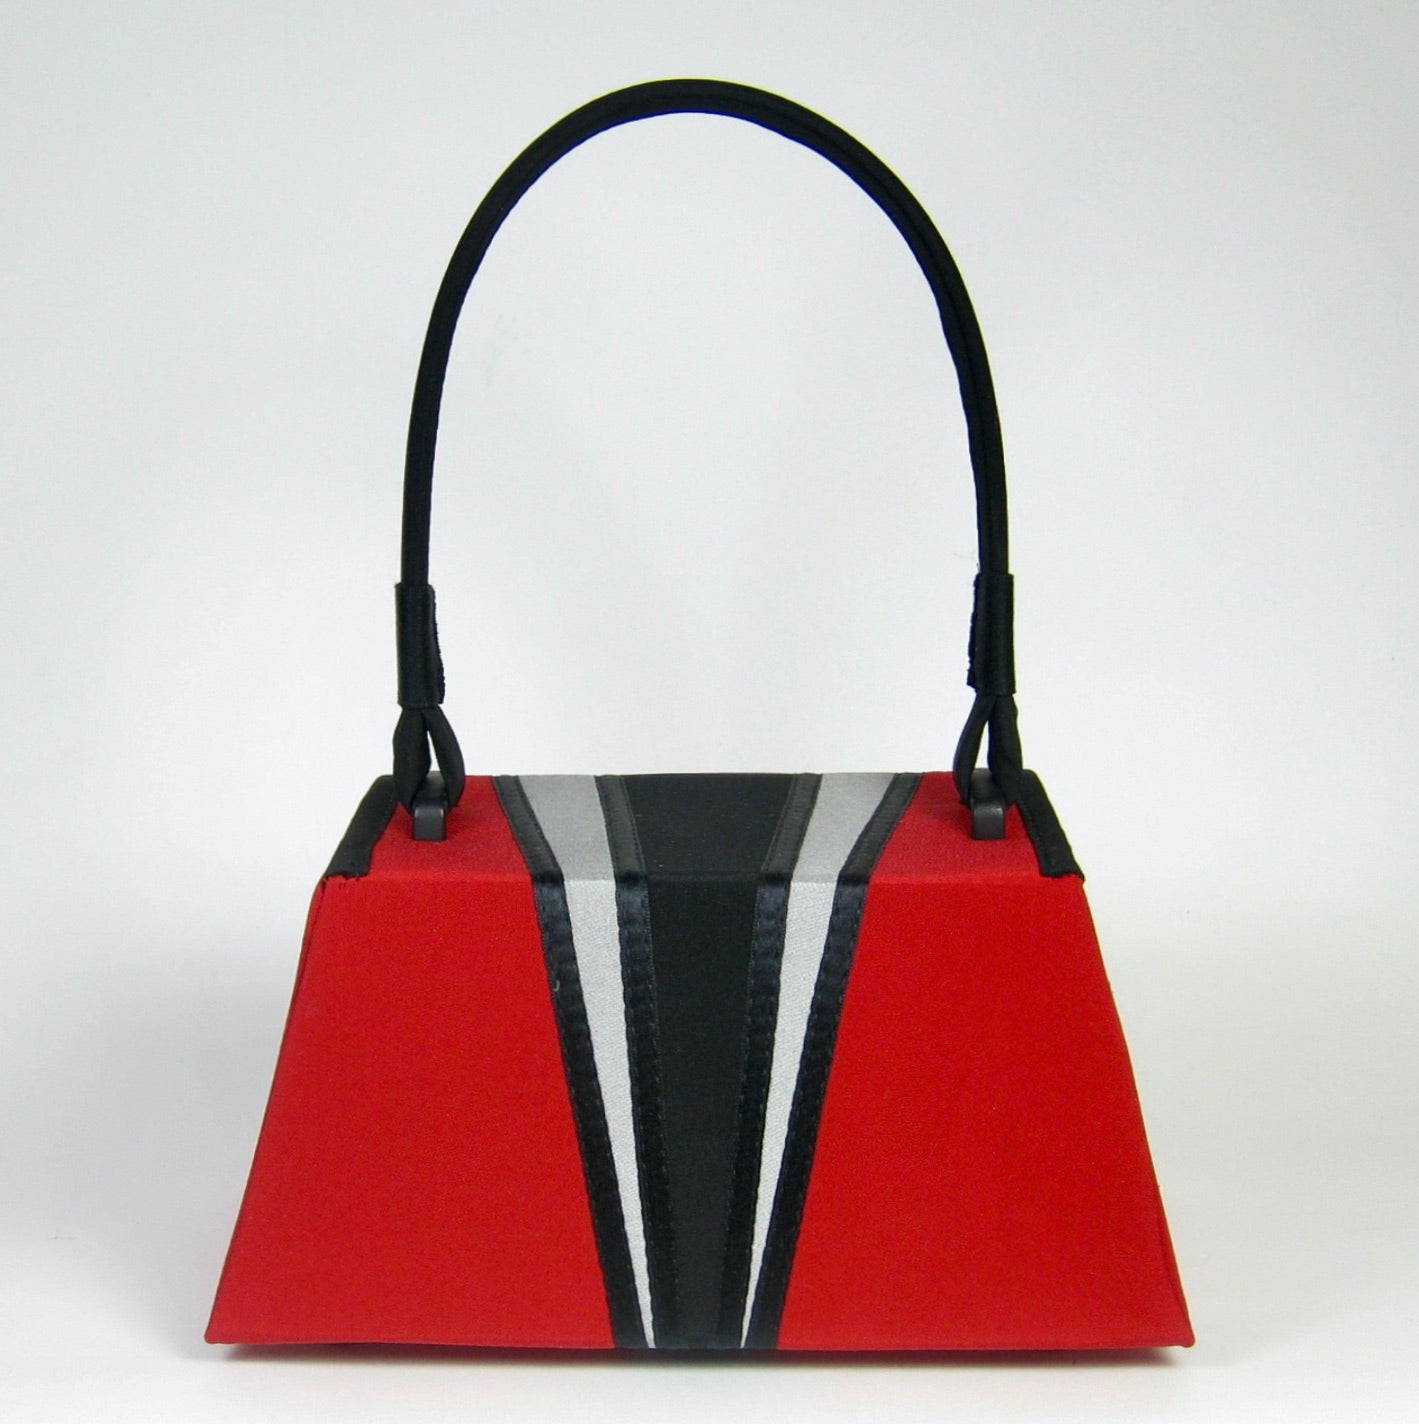 Deco Purse - Red with Black and Pewter